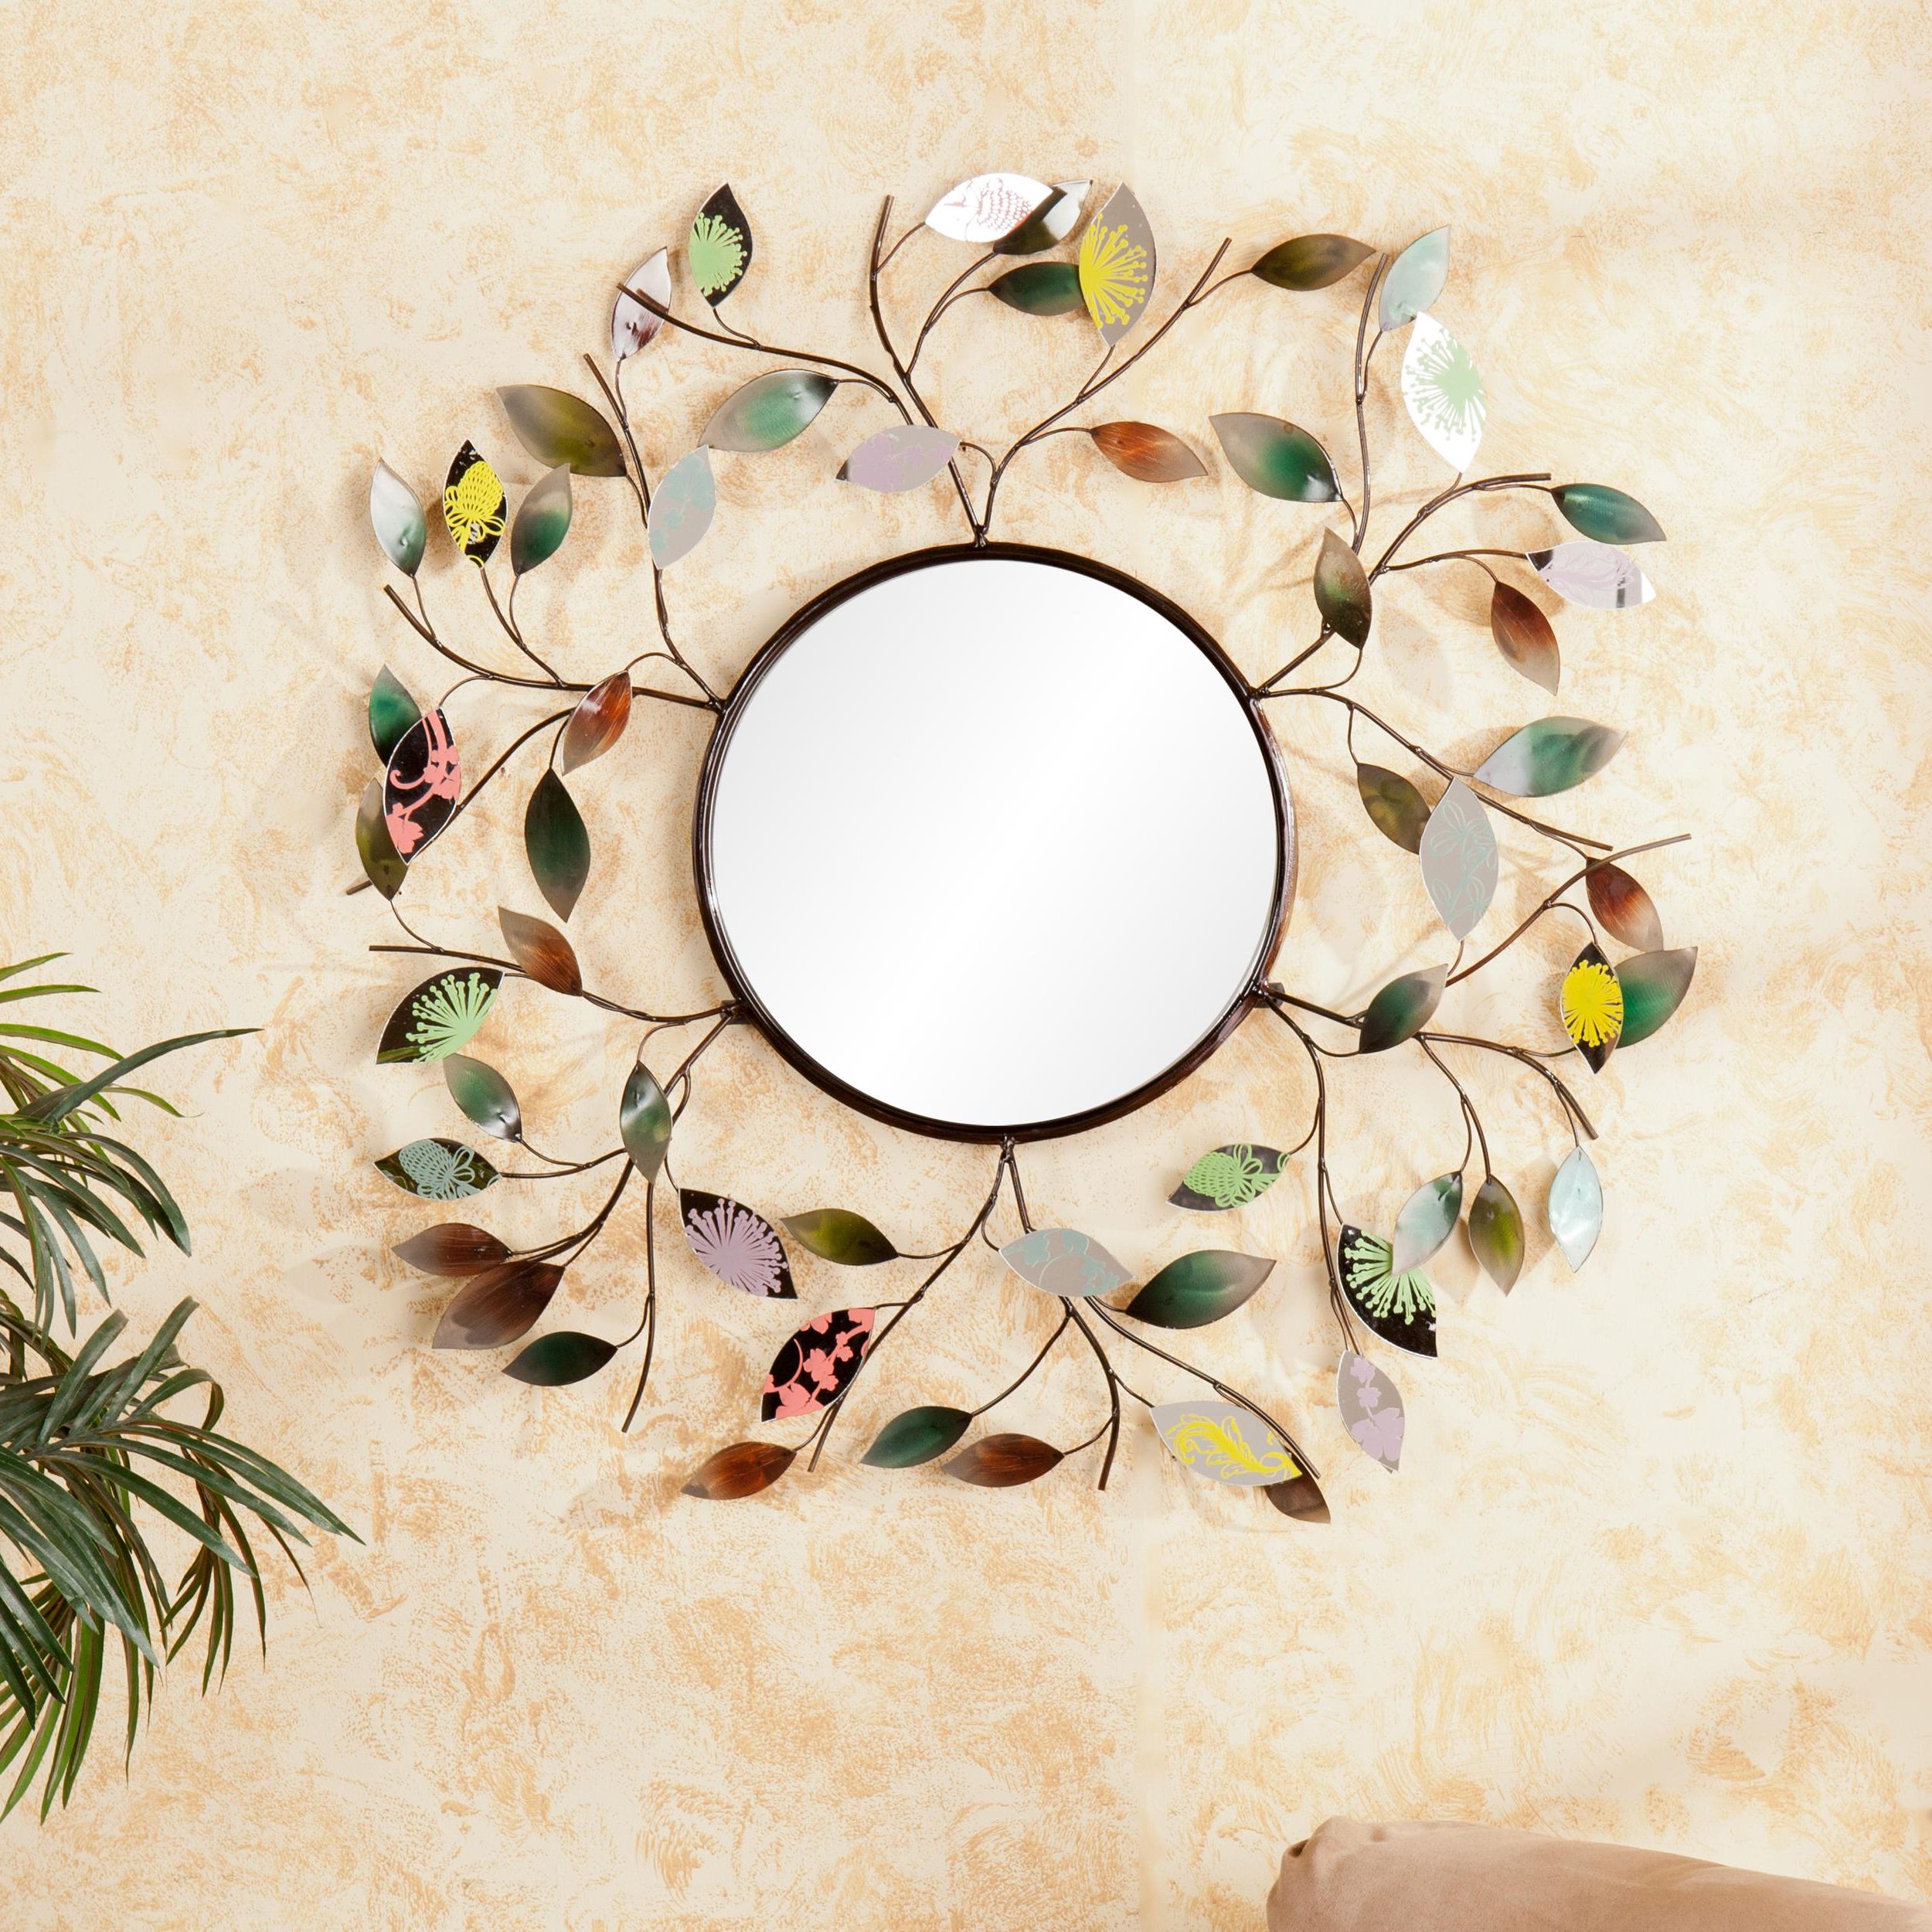 Decorative Round Wall Mirrors Pertaining To Current Decorative Metallic Leaf Wall Mirror – 3d Leaf Hanging Art – Multicolored  Eclectic Style (View 18 of 20)